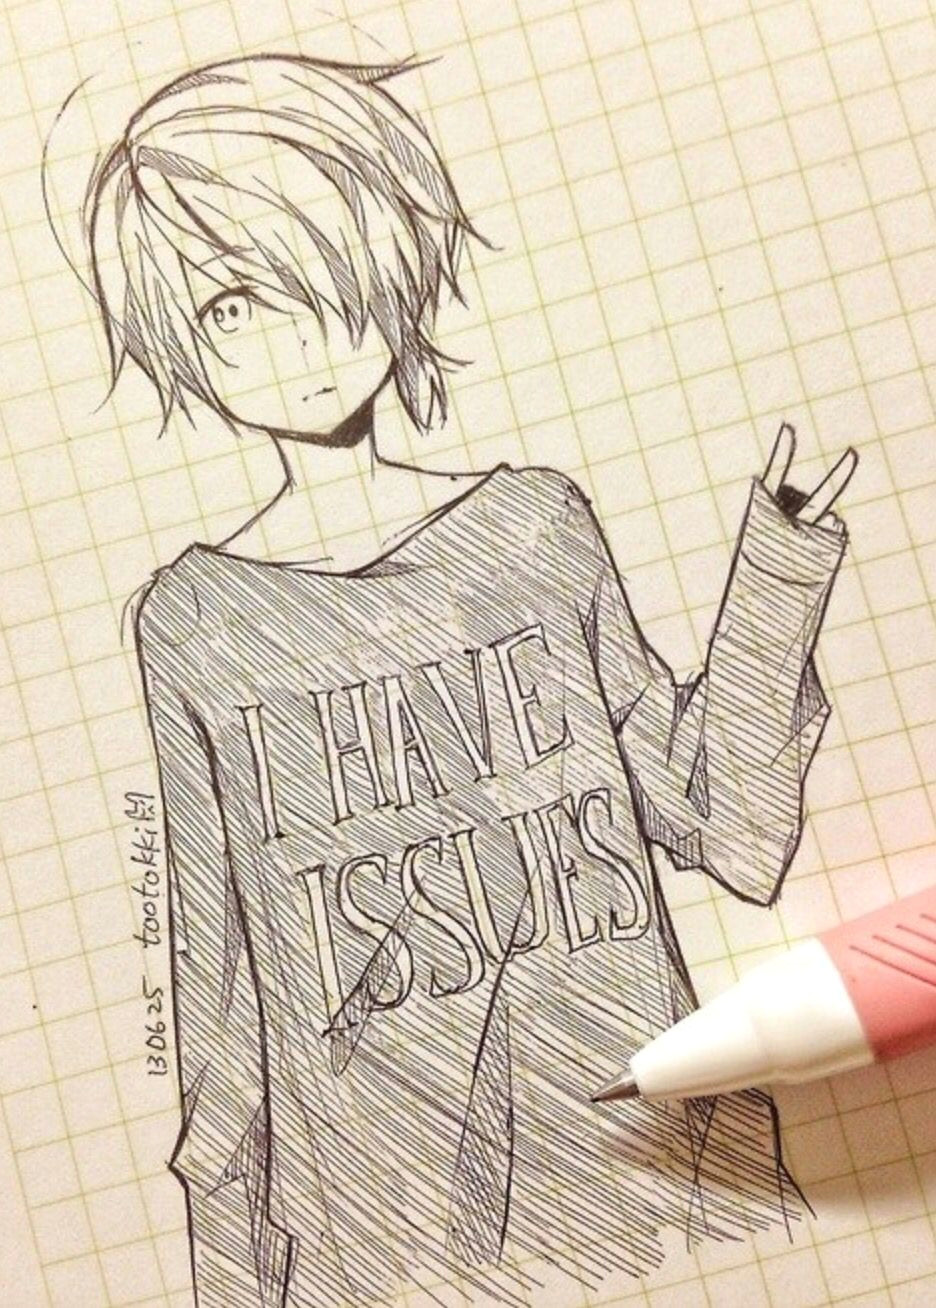 Cute Drawing Relationship Cute Anime Drawing tootokki I Have issues Sweater Anime Drawings